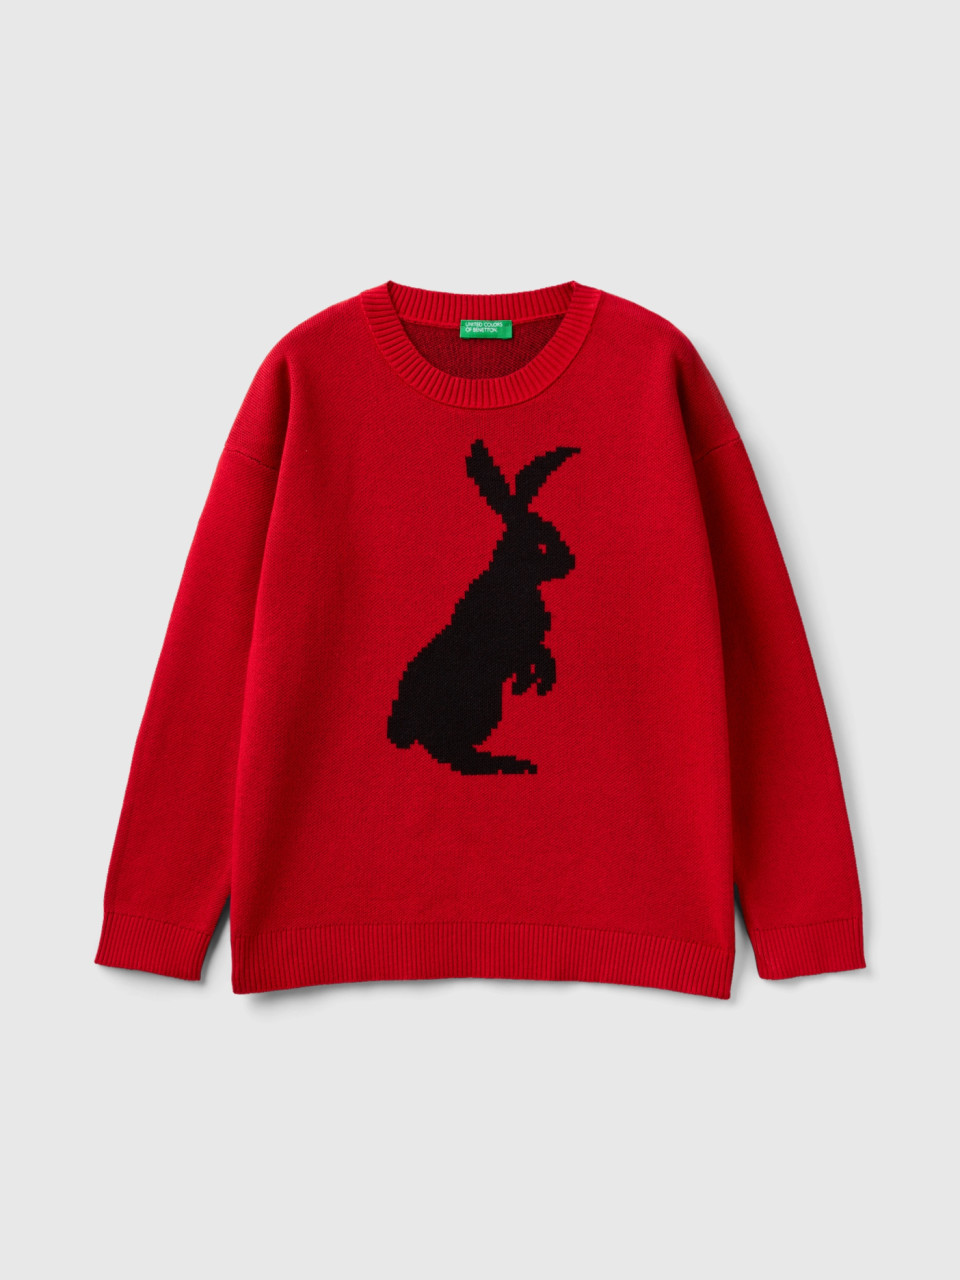 Benetton, Sweater With Bunny Design, Red, Kids